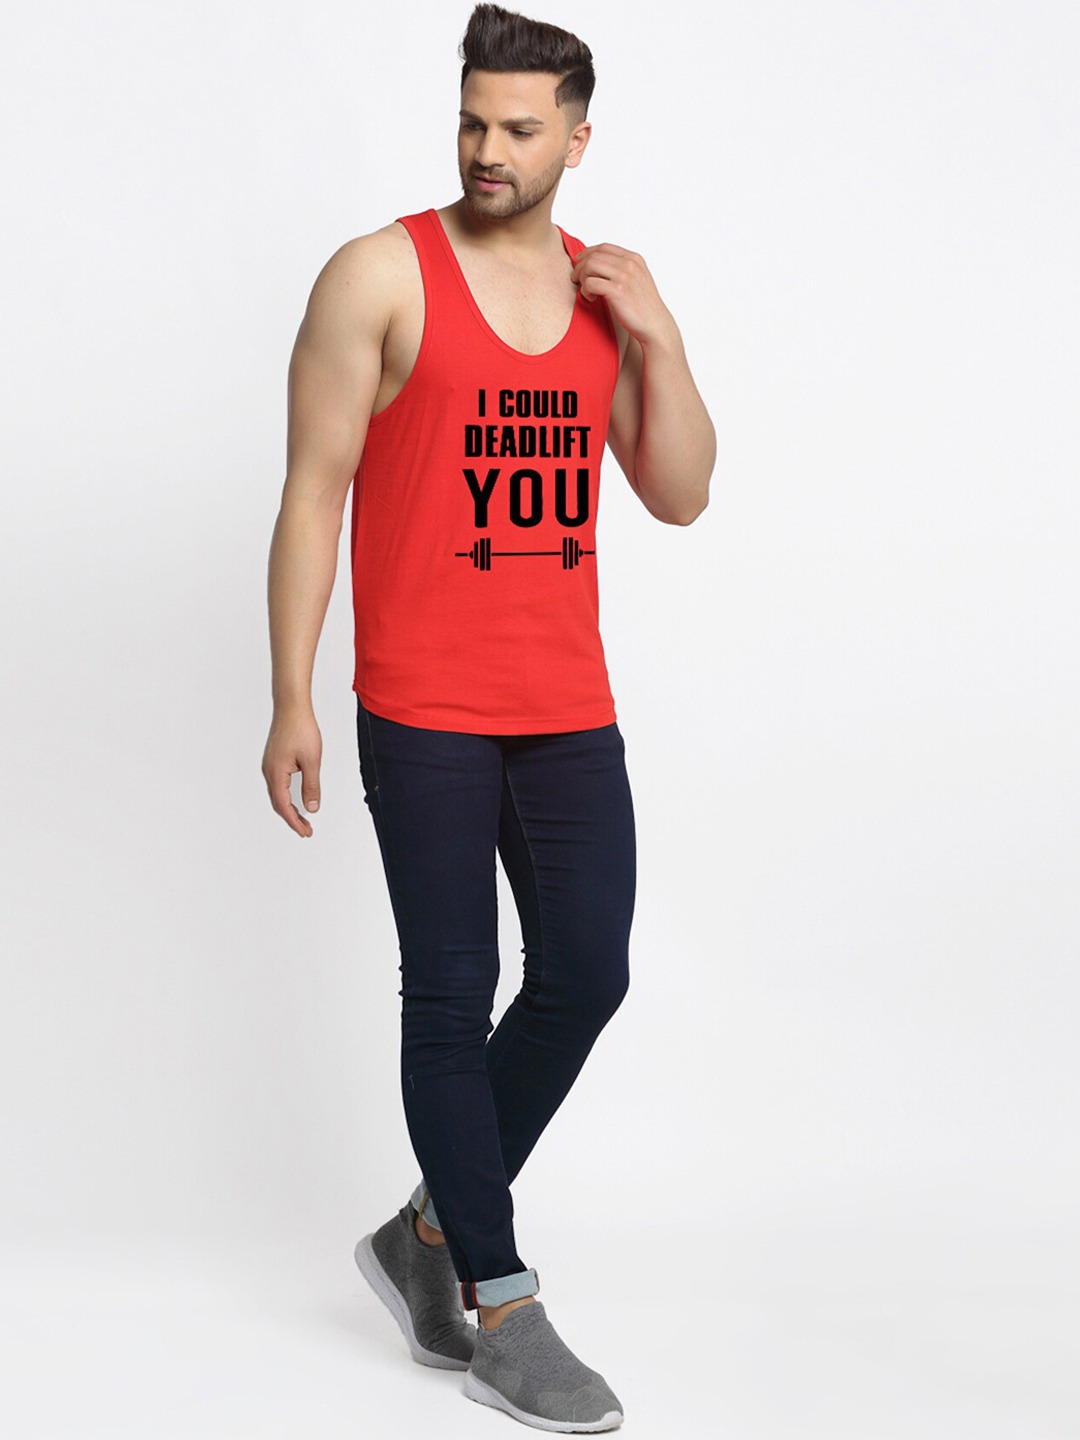 Clothing Innerwear Vests | Friskers Men Red I could deadlift you Apple Cut Sleeveless Gym Vest - CA85352